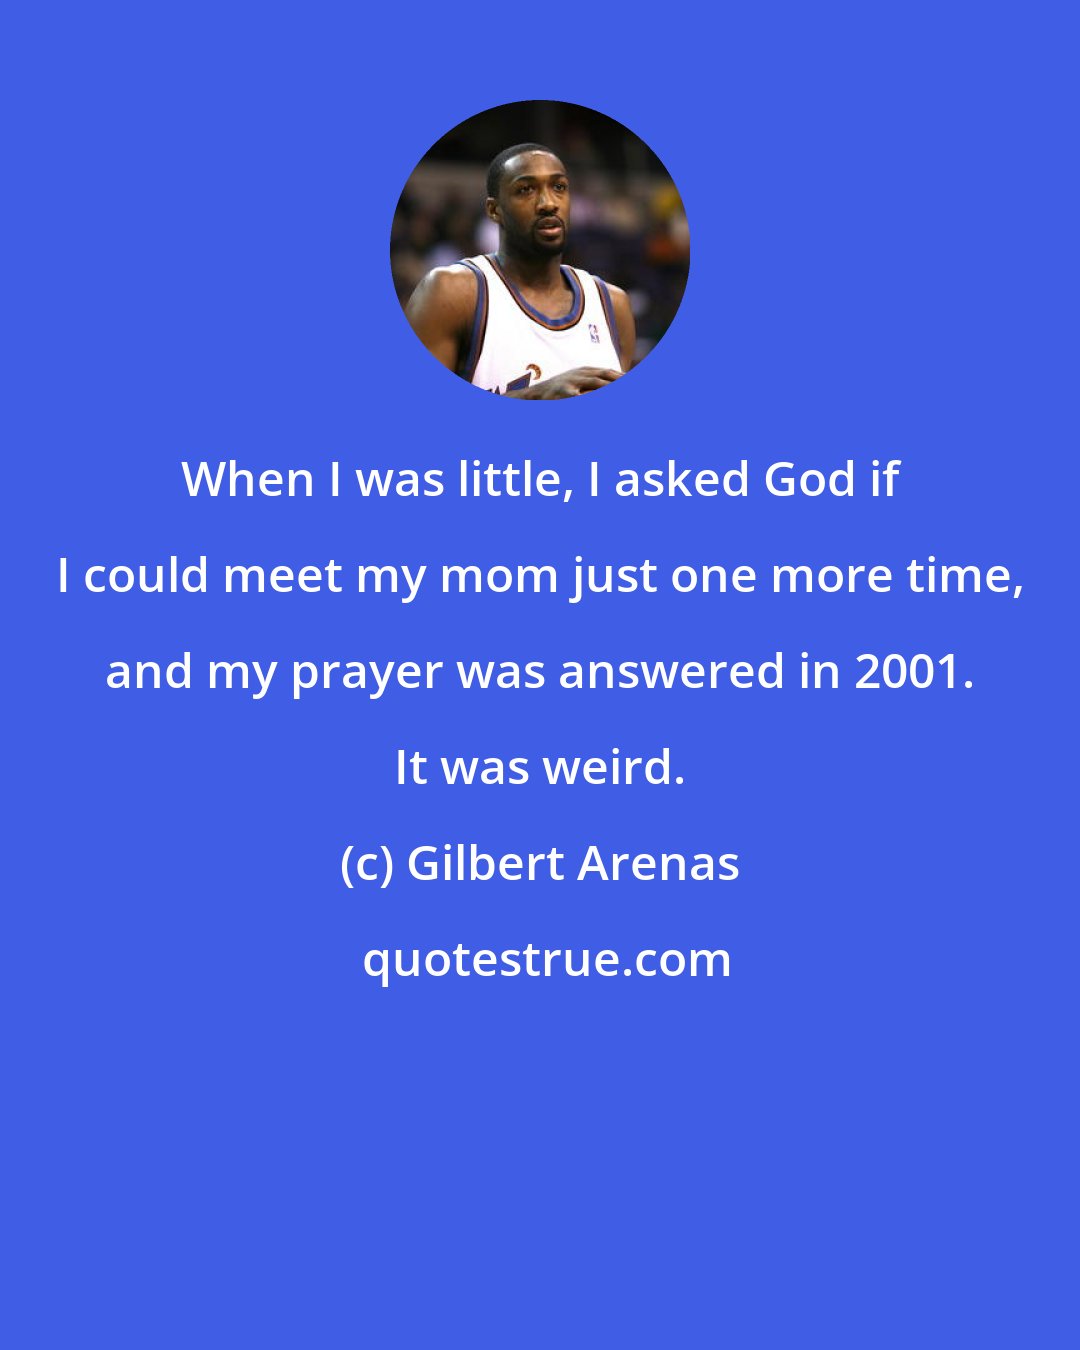 Gilbert Arenas: When I was little, I asked God if I could meet my mom just one more time, and my prayer was answered in 2001. It was weird.